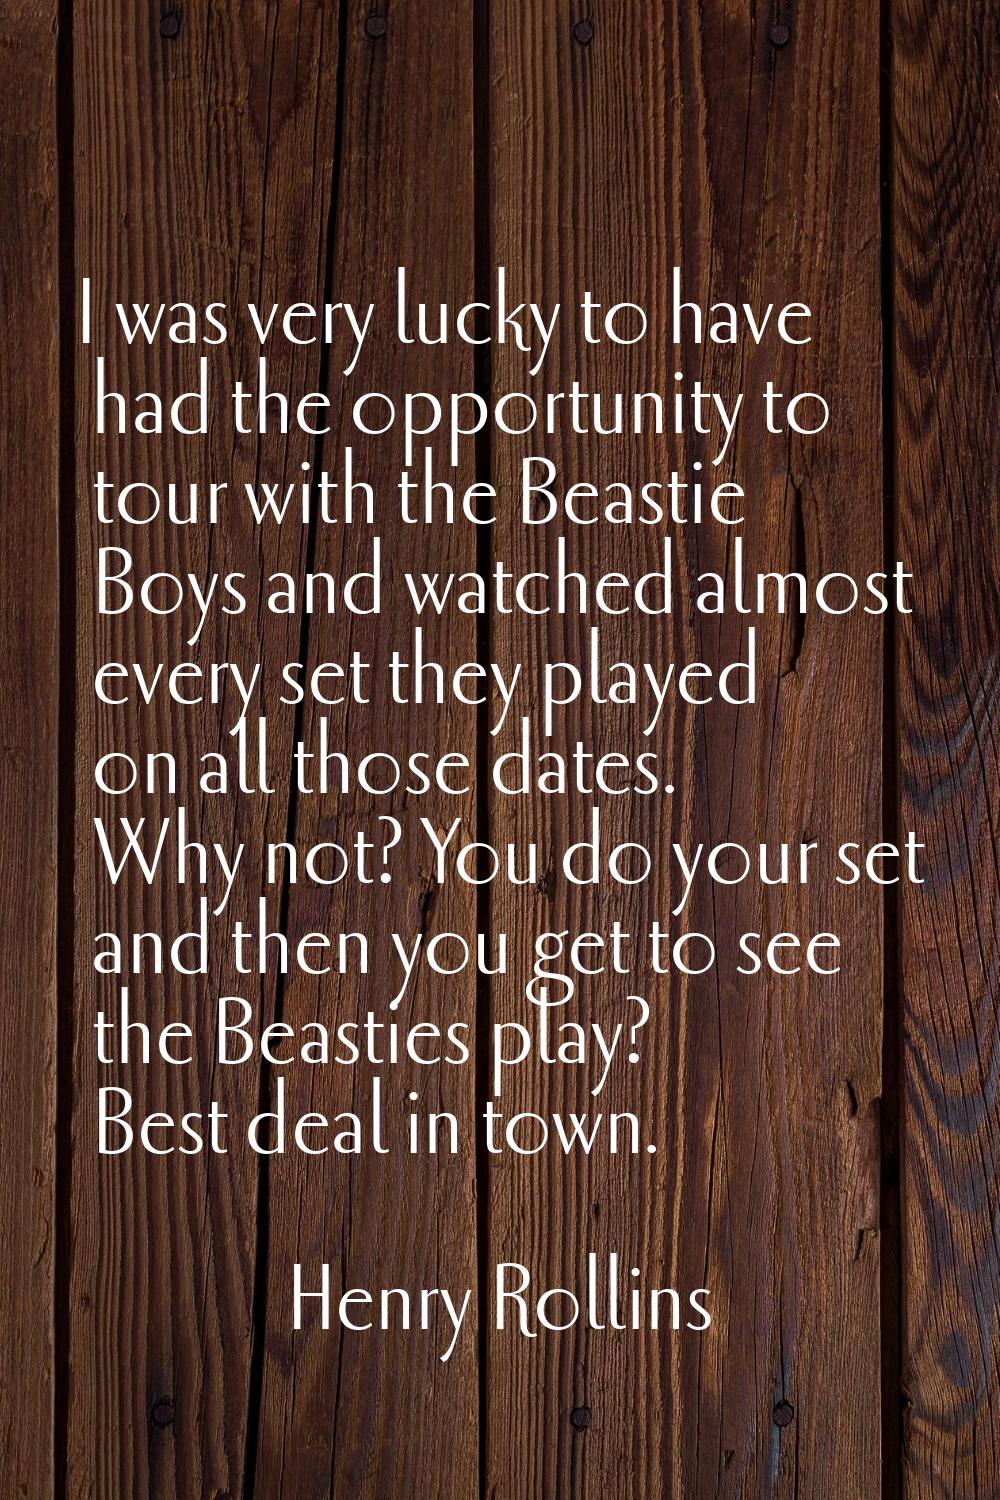 I was very lucky to have had the opportunity to tour with the Beastie Boys and watched almost every